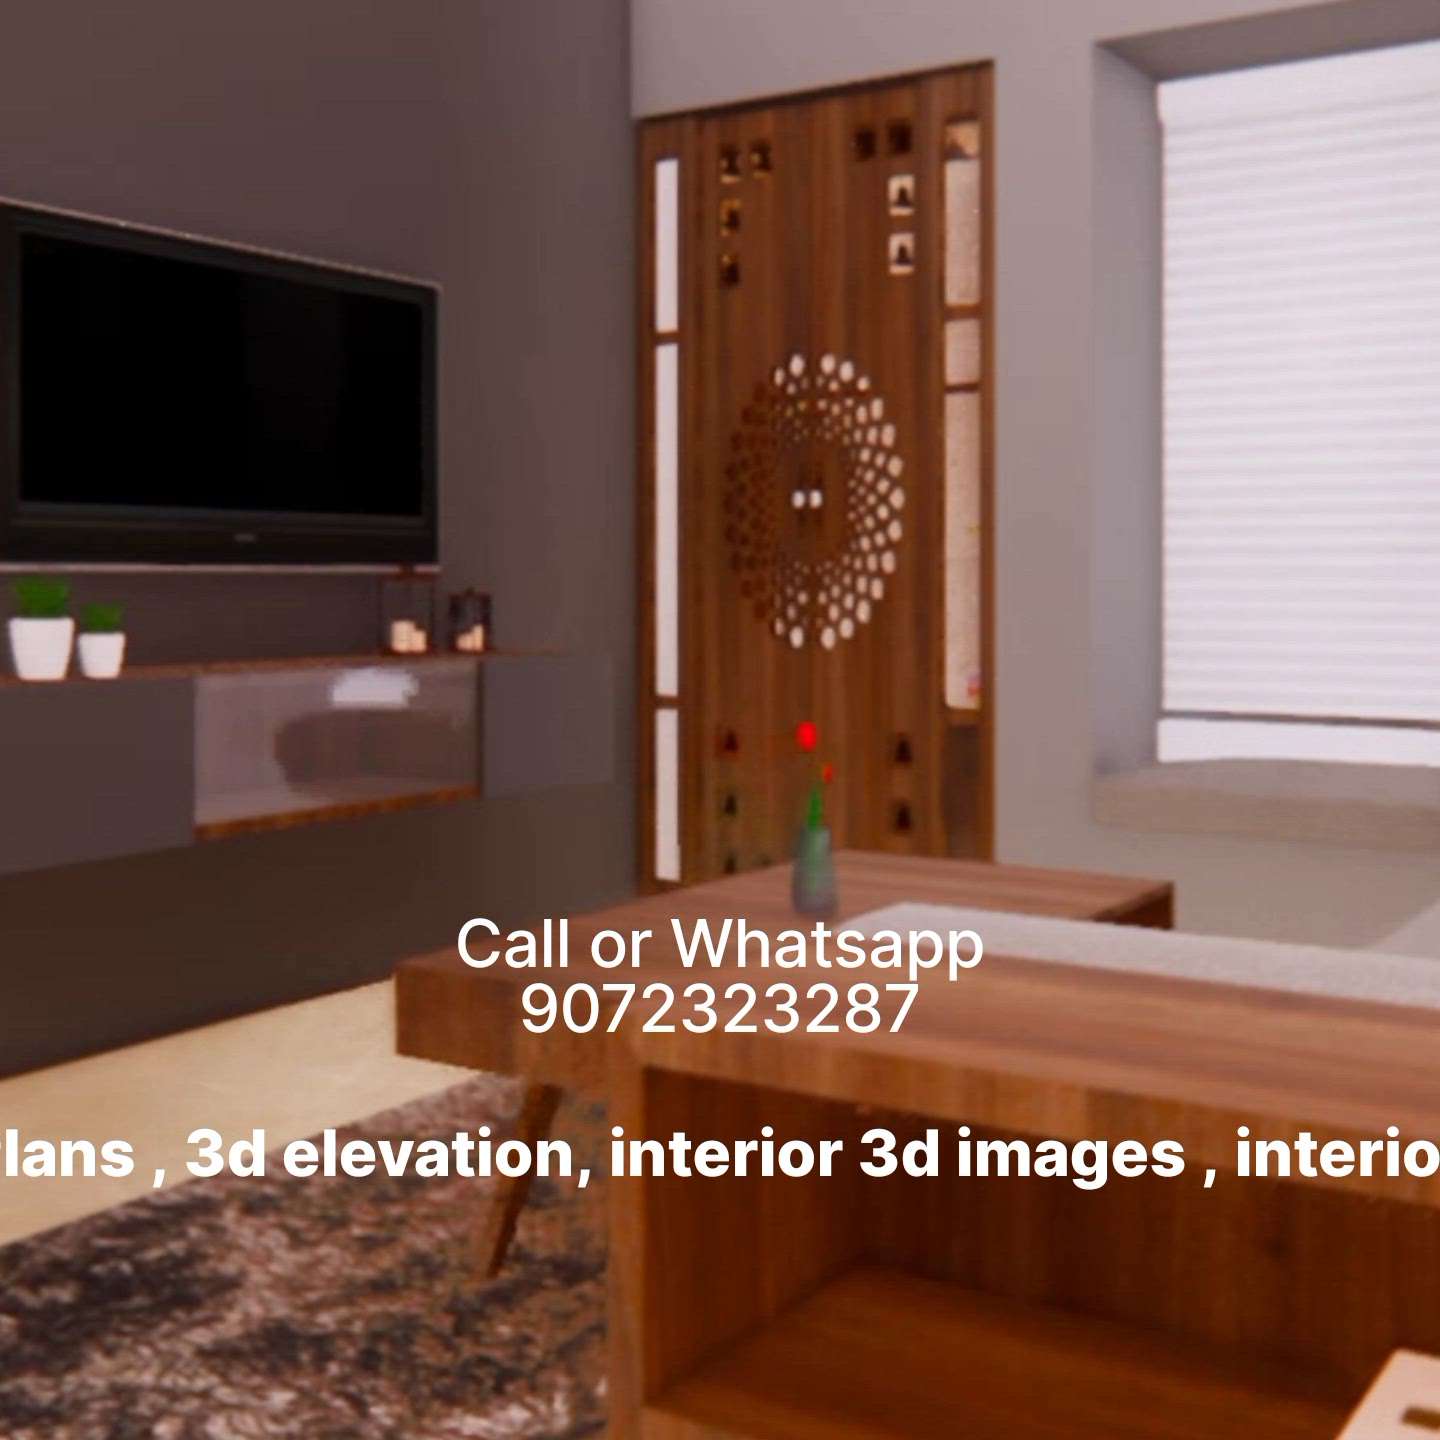 interior design 3 d designs
site :- Palakkaad
1000sqft
Plans , 3d elevation, interior 3d images , interior dimensions , estimation , detailed drawings , Landscape design, detailes , All type architectural plans and services , site supervision availability, contact 9072323287 . Pencil taps Architecture&interiors.
Home sweet home! Check out the floor plan of this cozy two bedroom apartment. Perfect for anyone looking for a comfortable living space. 
.
.
3d elevation 
Plan 
Home 
Permit plans 
Interior design 
Landscape design 
All architectural plans & services 

Contact :- 9072323287


#Elevation #homedesigne #Architectural&Interior #kerala_architecture #architecturedaily #keralaarchitectureproject #new_home #elevationideas #elevationdesigning #homedesignkerala #homedesignideas #Architect 
#twobedroomapartment #floorplan #homedecor #cozyliving #apartmentliving #newhome #modernliving #spaciousliving #homedecor #interiordesign #diningtable #interiordesign #furniture #homeinspo  #BedroomDecor